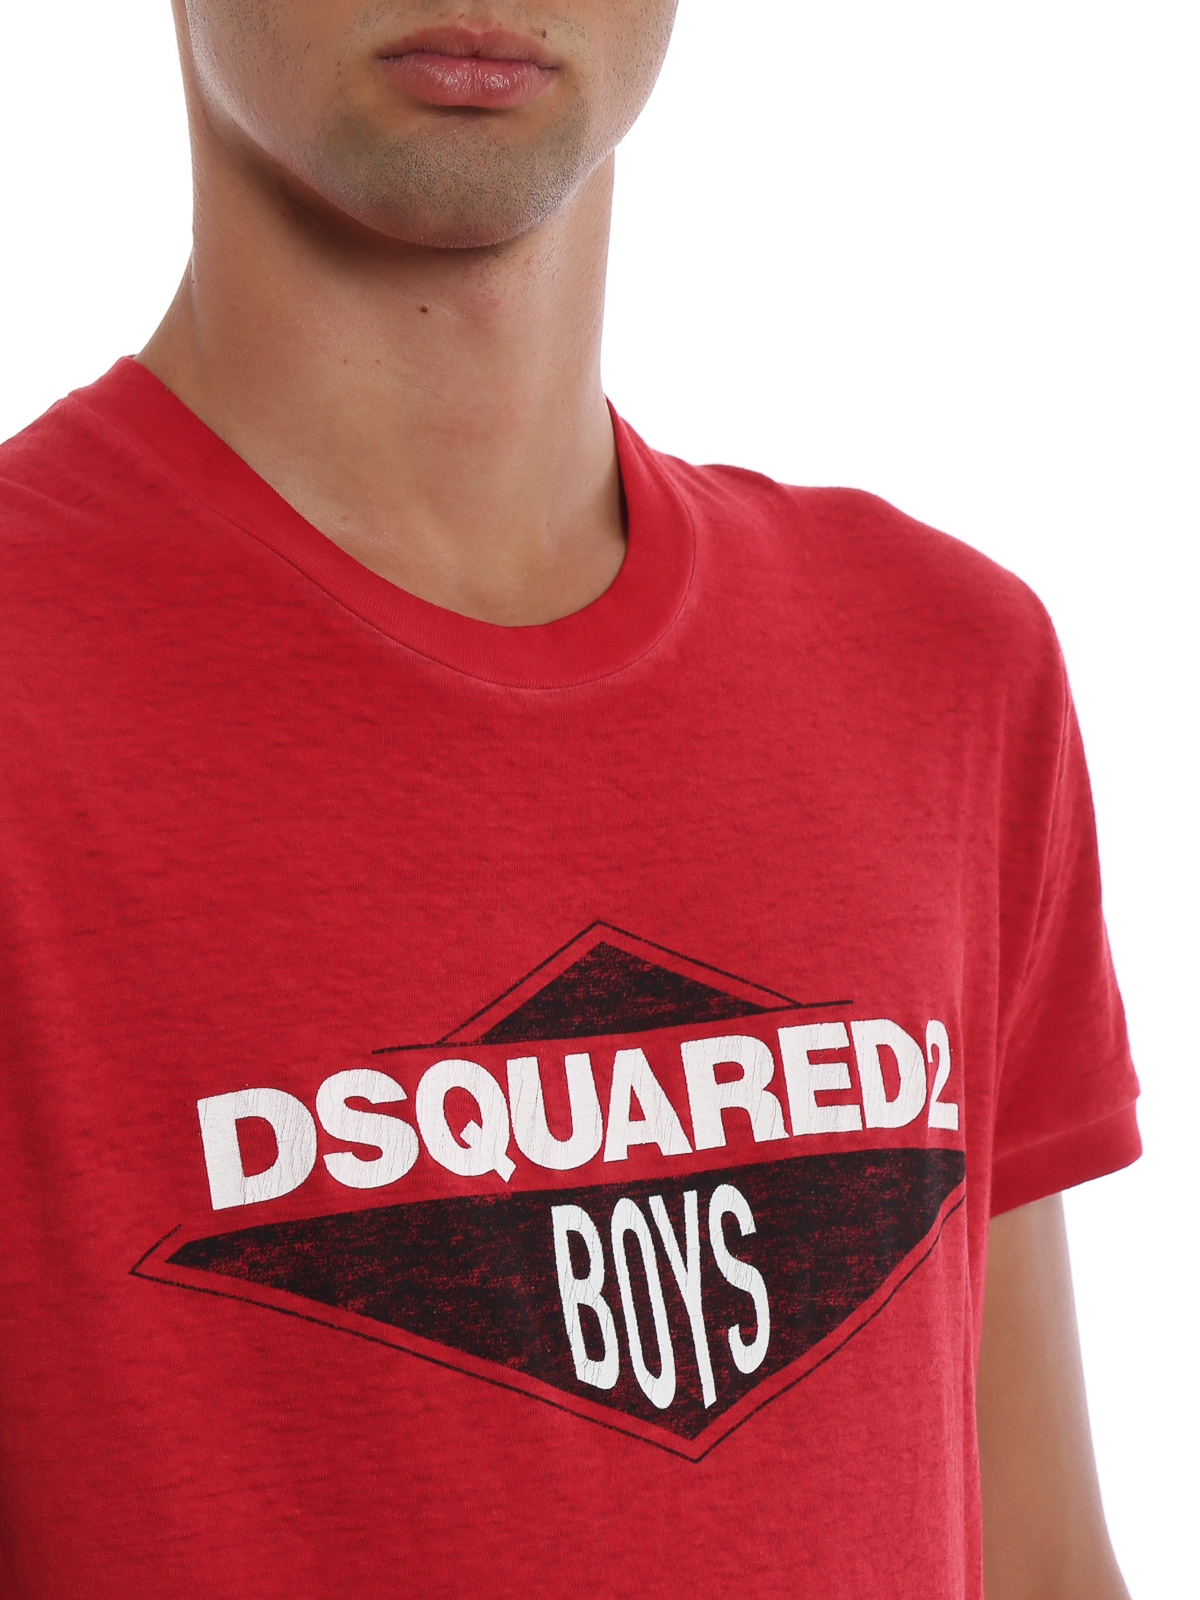 dsquared boys top